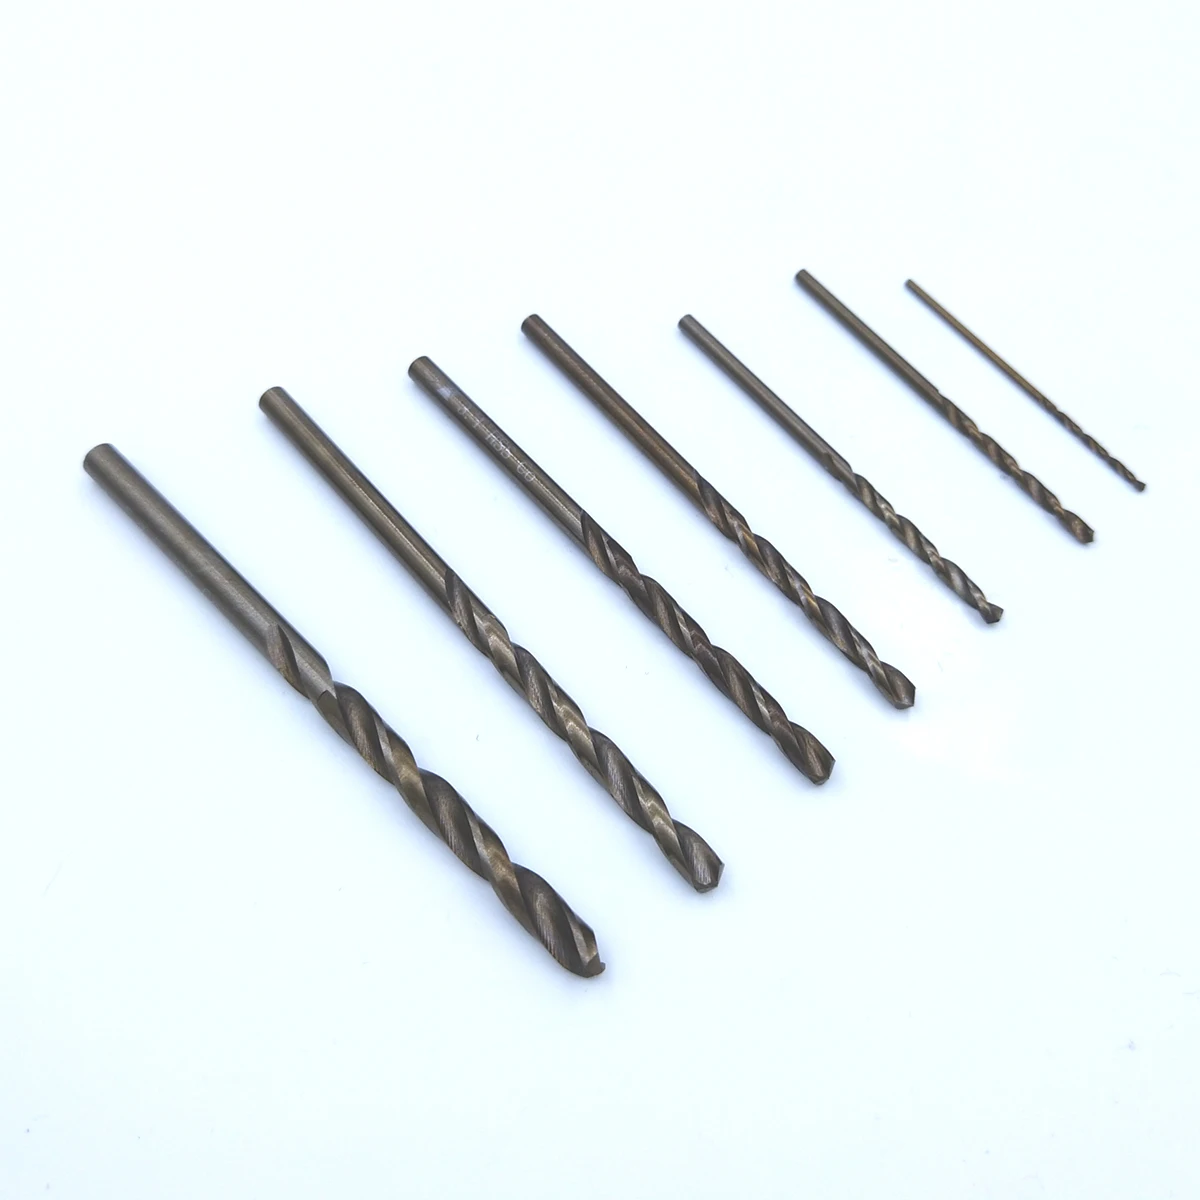 5 5.0 5.1 5.2 5.3 5.4 5.5 5.6 5.7 5.8 5.9 mm HSS-CO M35 Cobalt Steel Straight Shank Twist Drill Bits For Stainless Steel